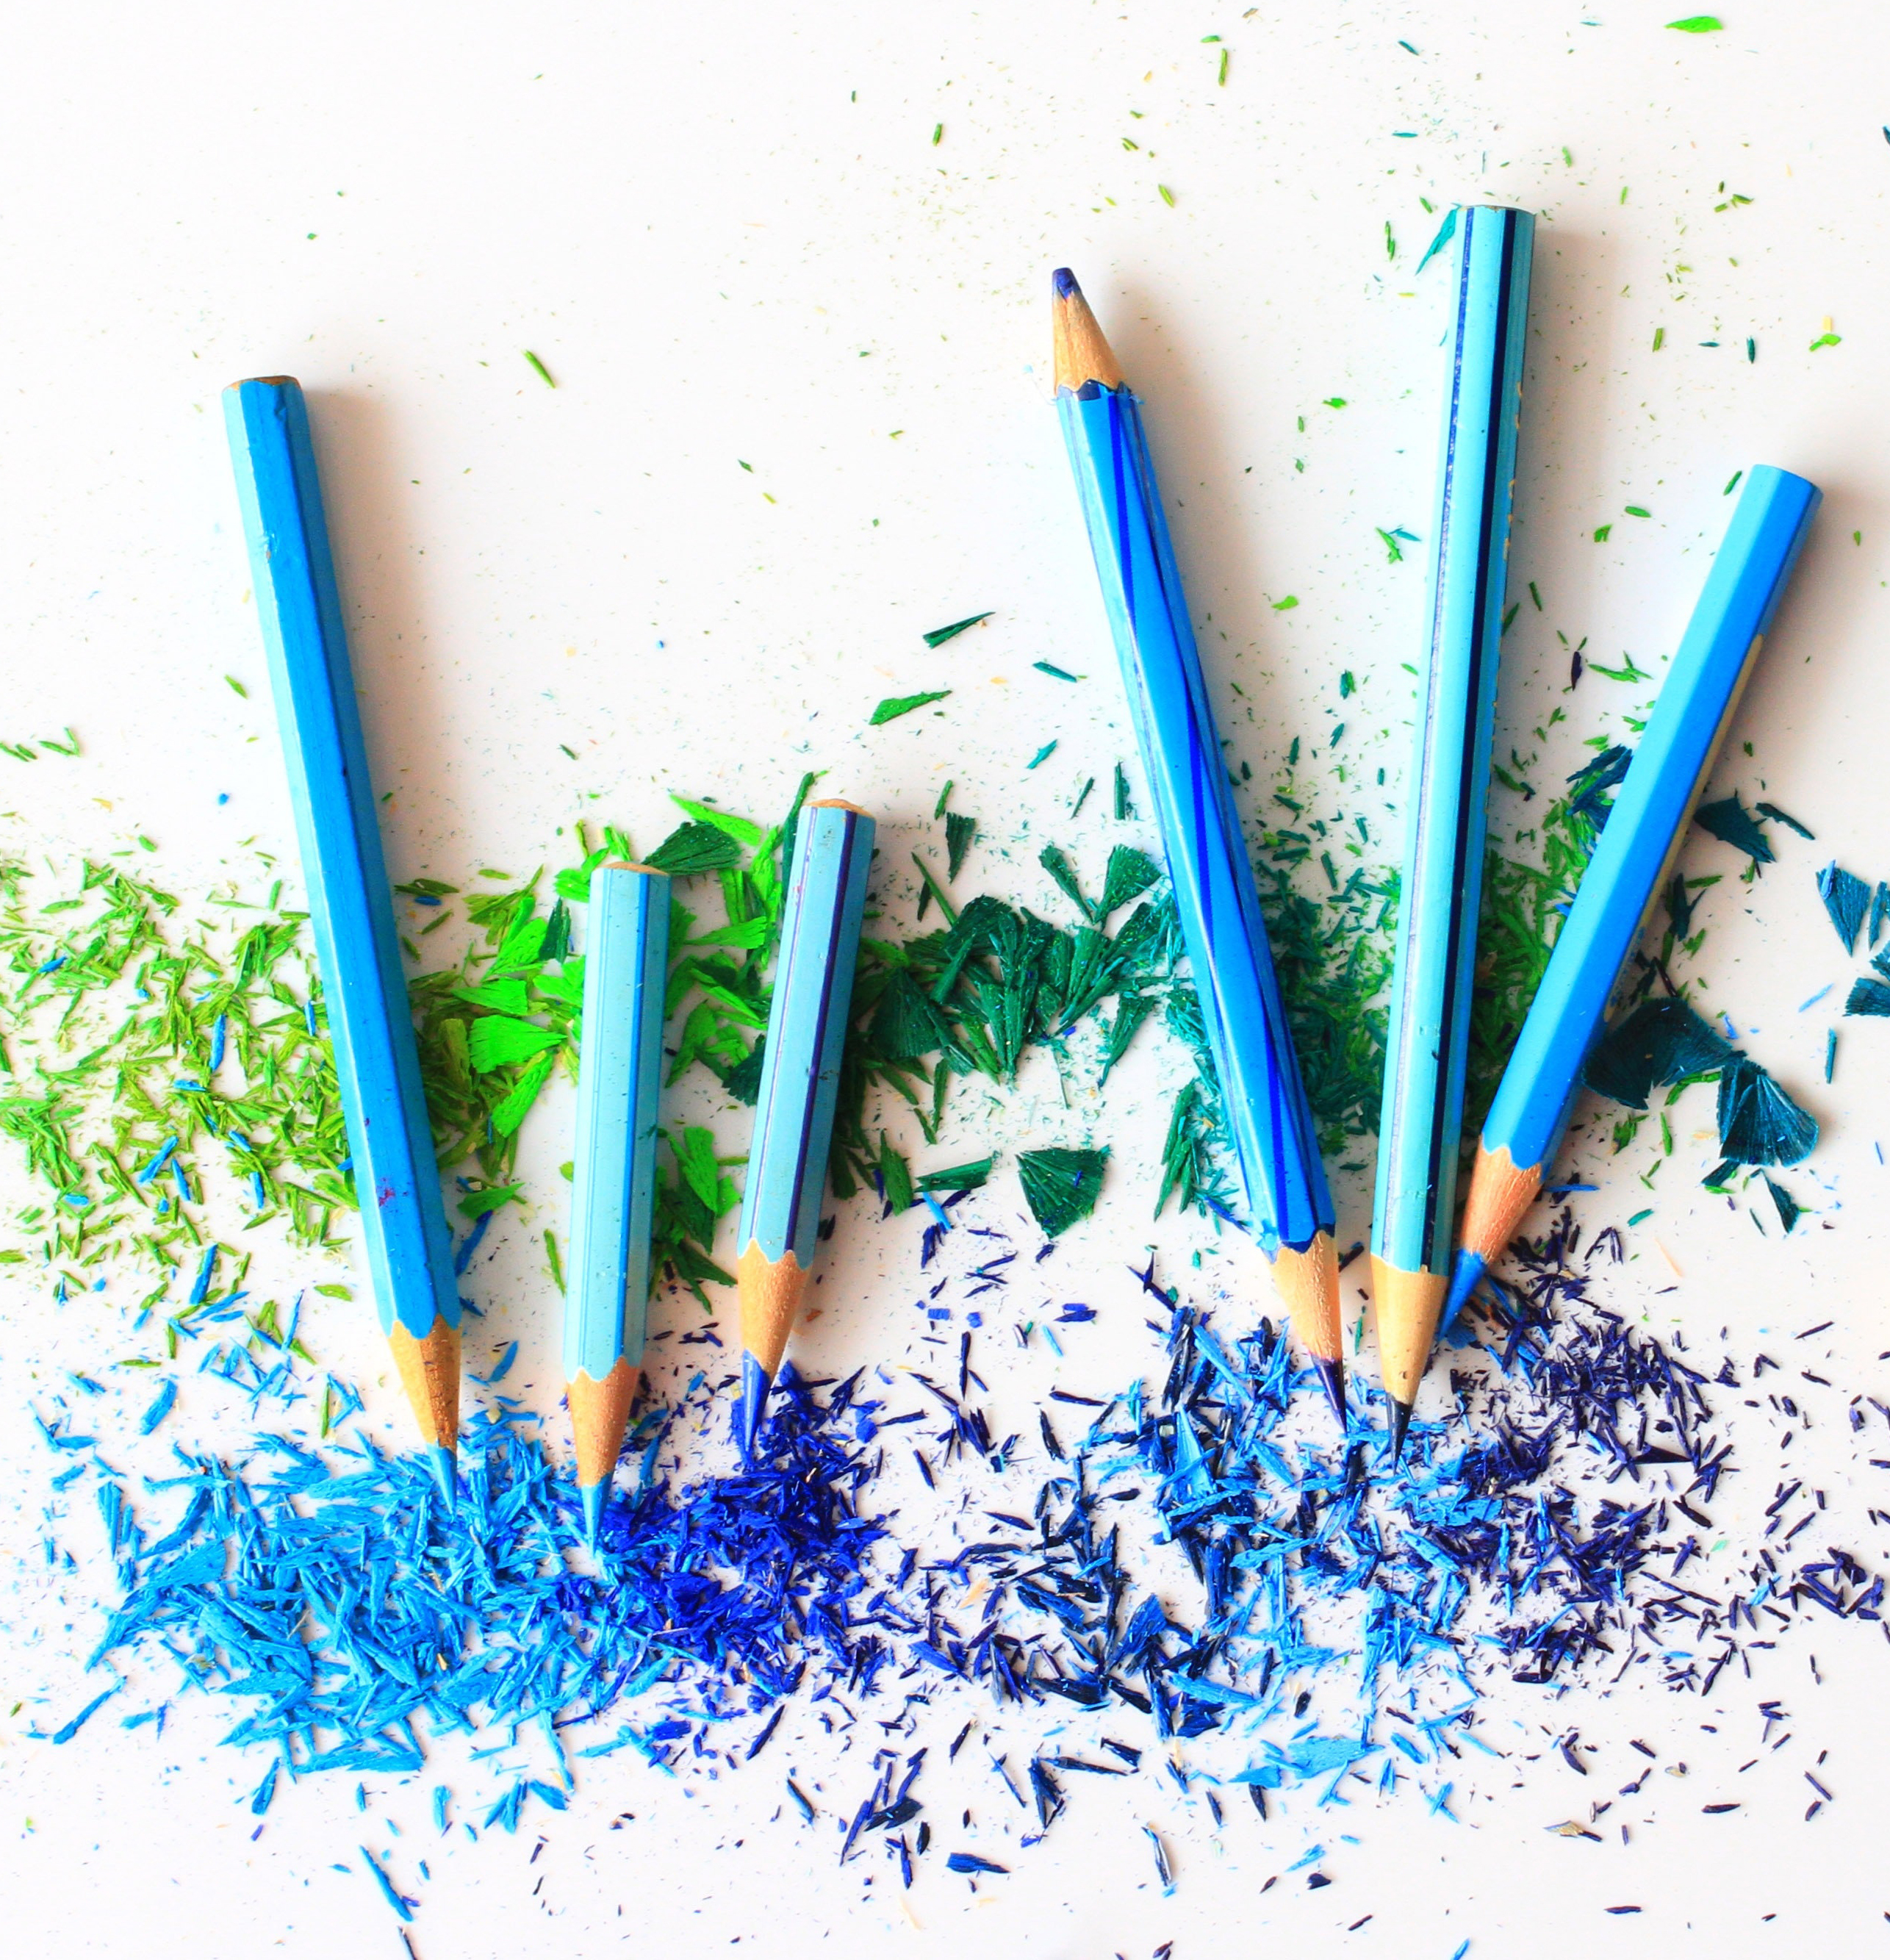 A photograph of six blue coloured pencils laying on pencil shavings